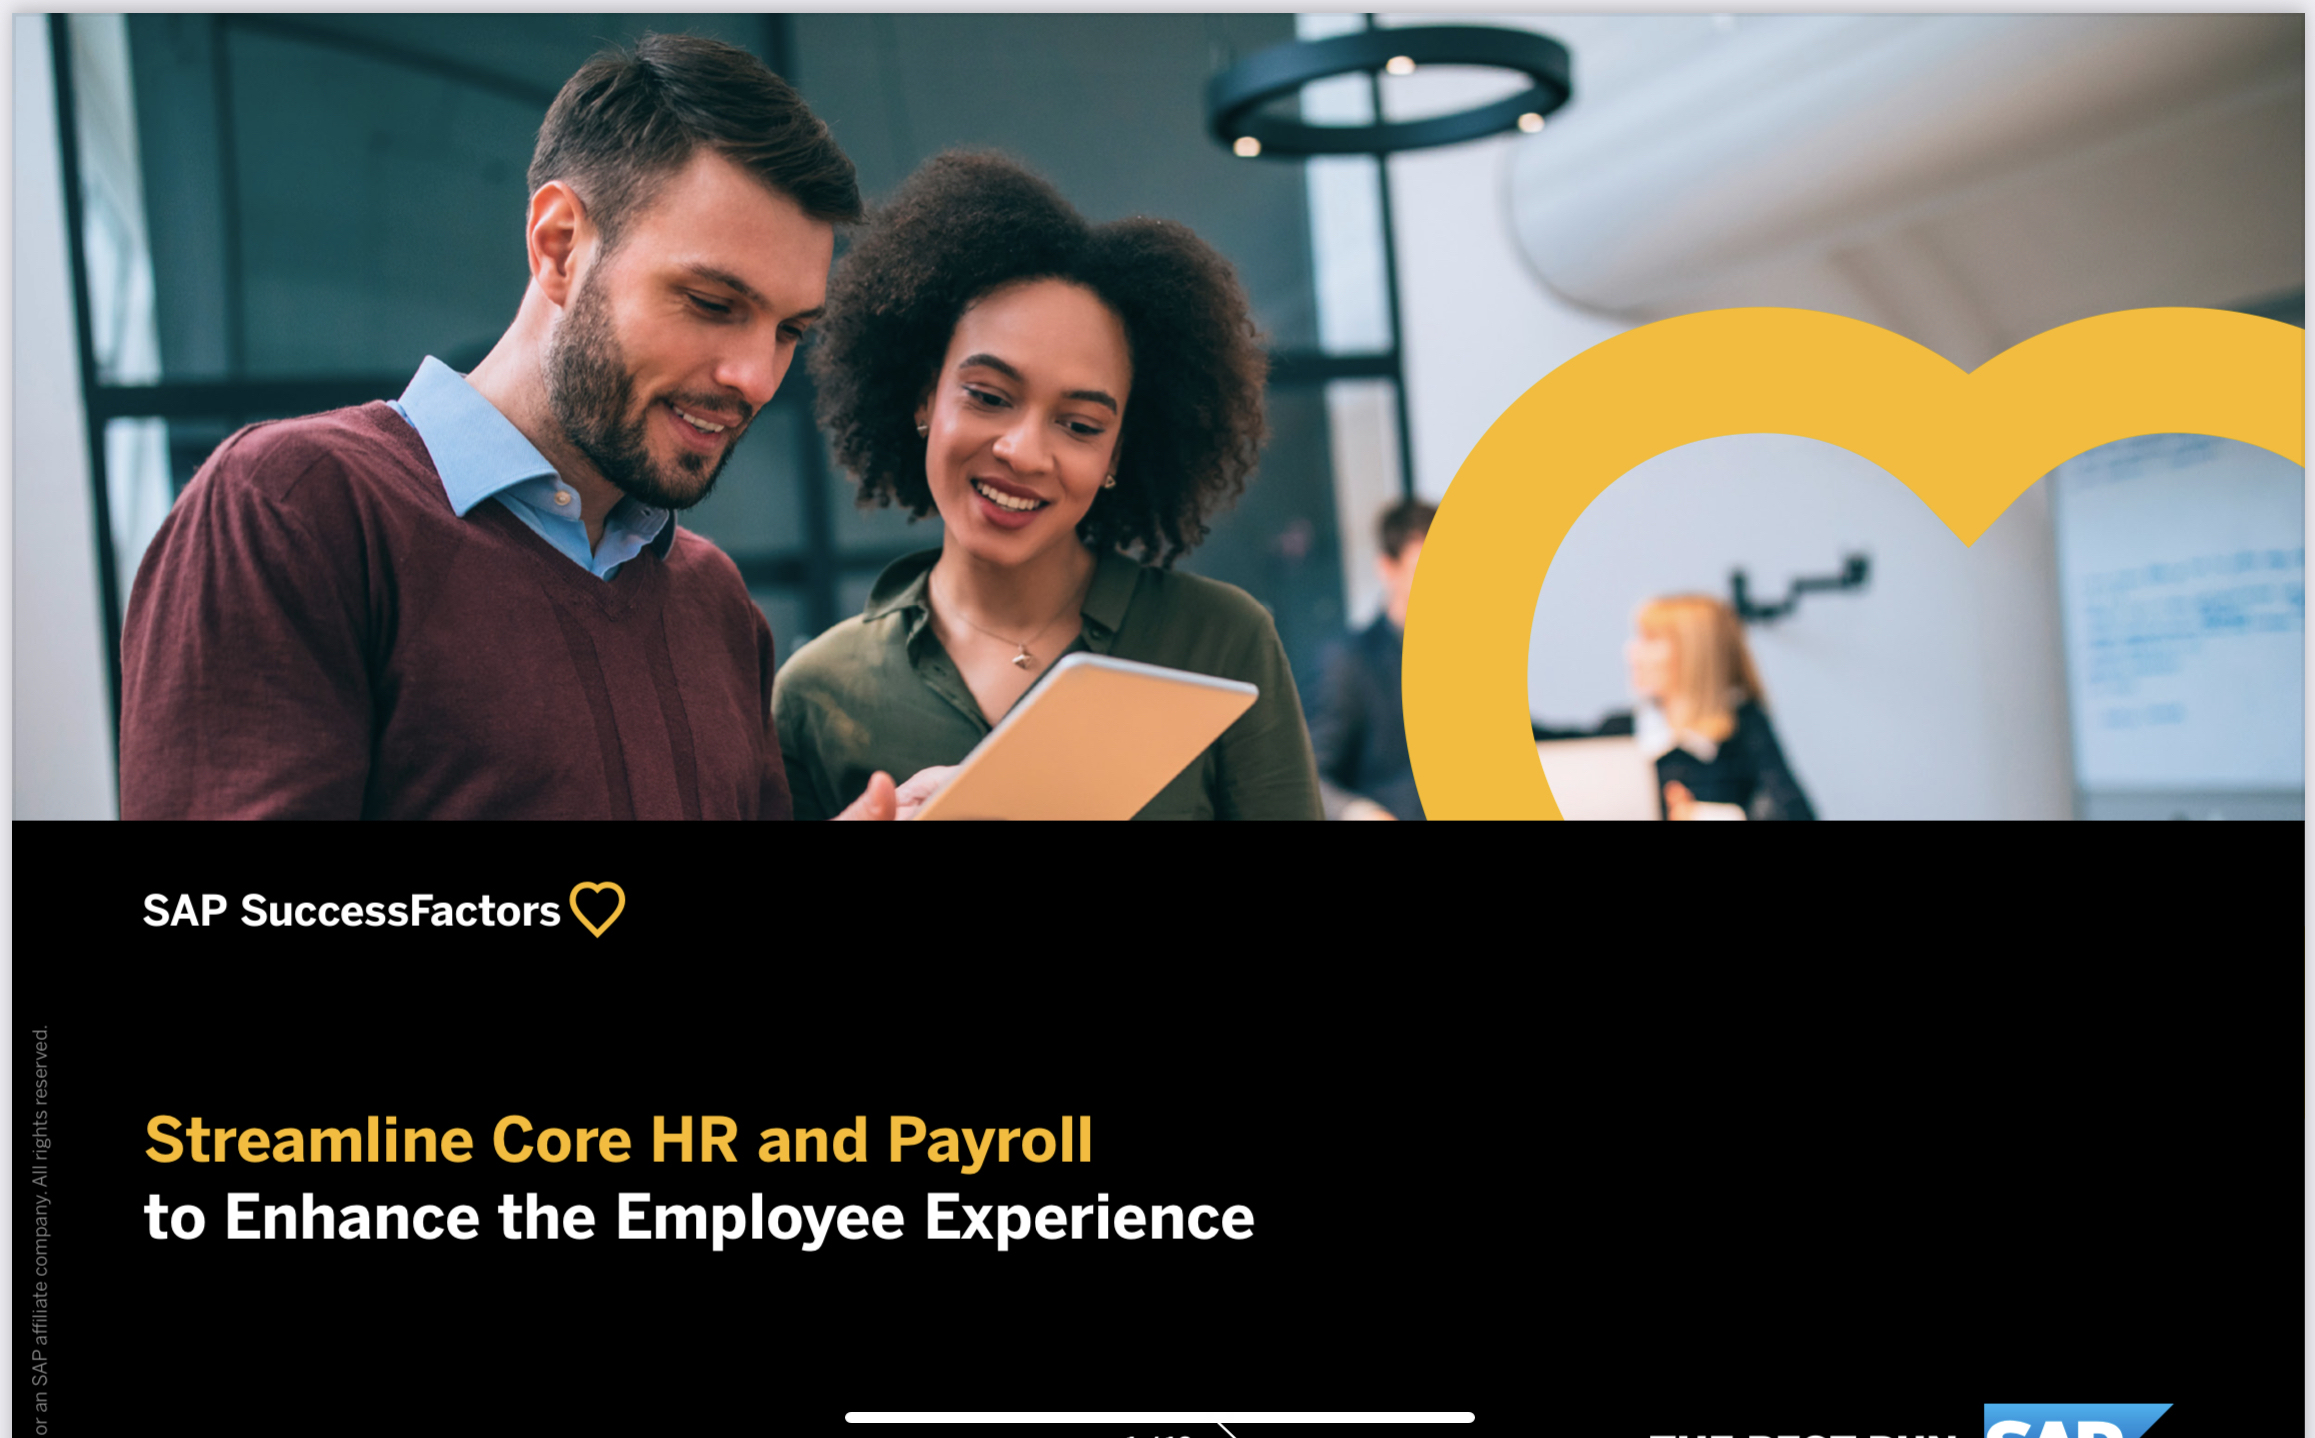 Streamline Core HR and Payroll to Enhance the Employee Experience